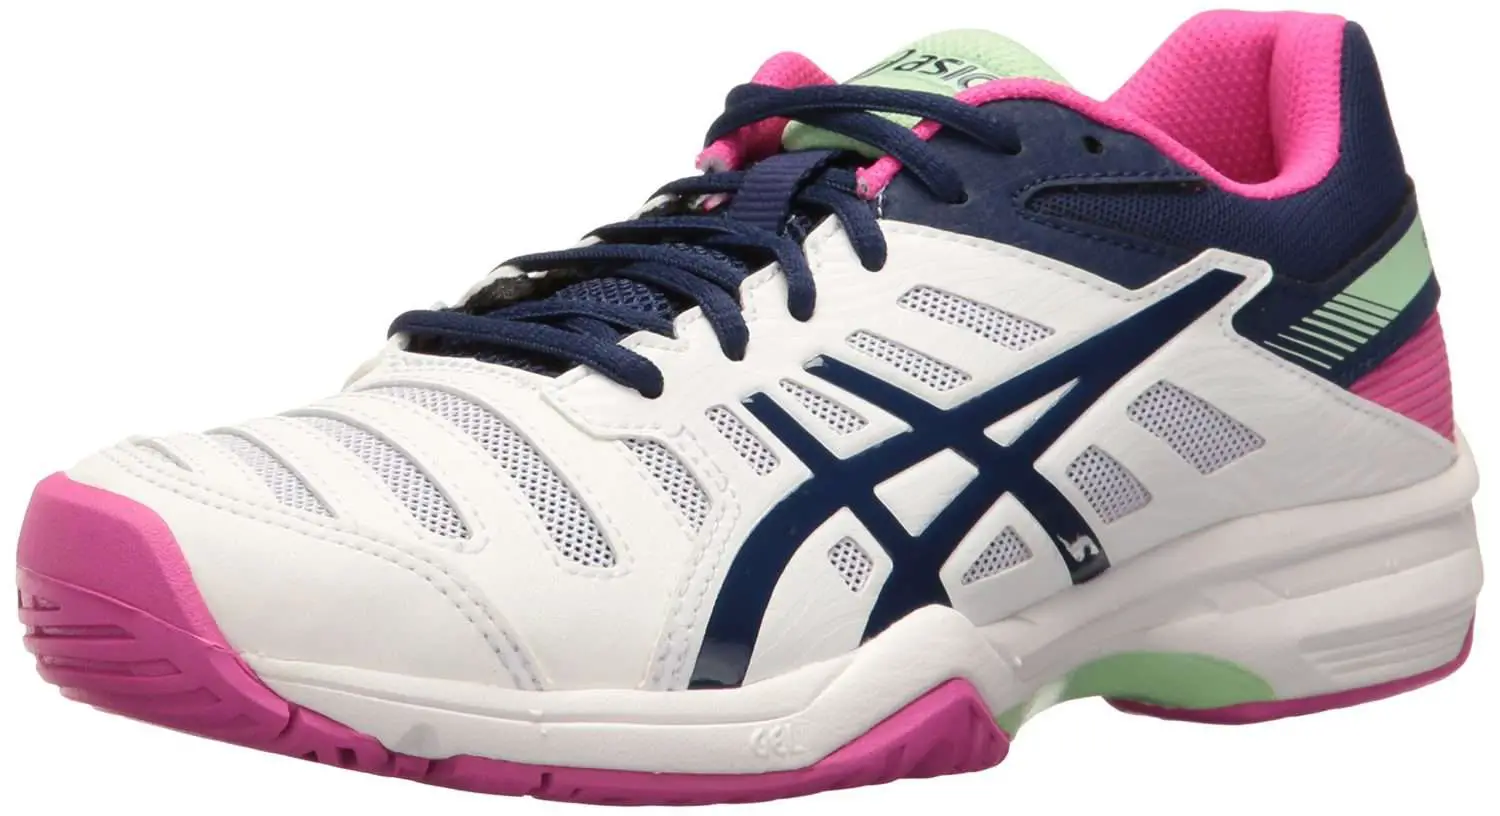 Best Hard Court Tennis Shoes for Women: Pro Player